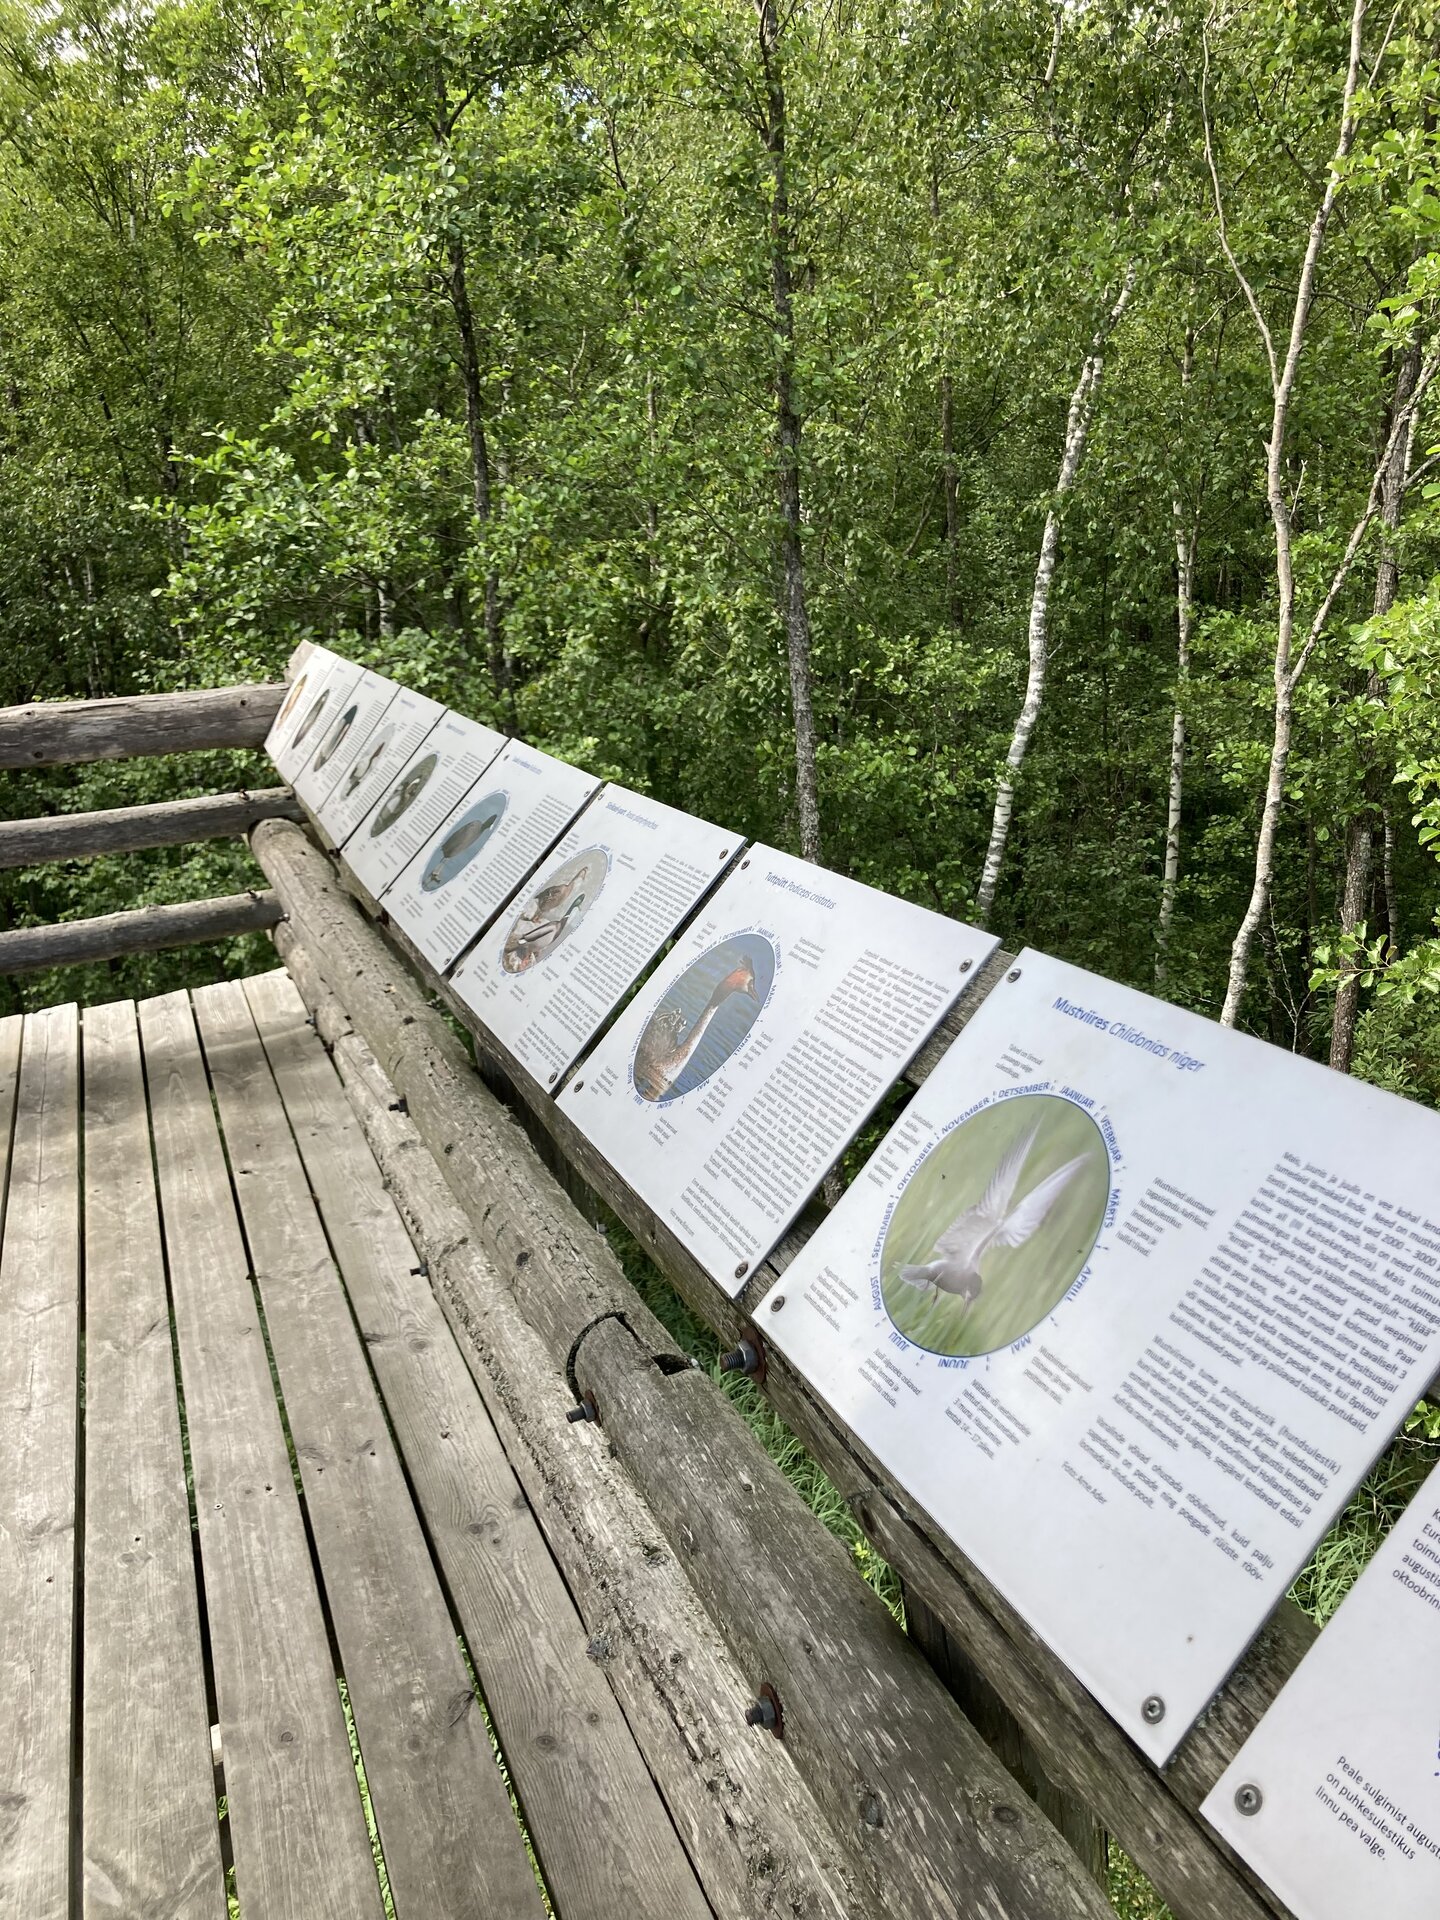 The information board of the observation tower at the lake includes bird information as well